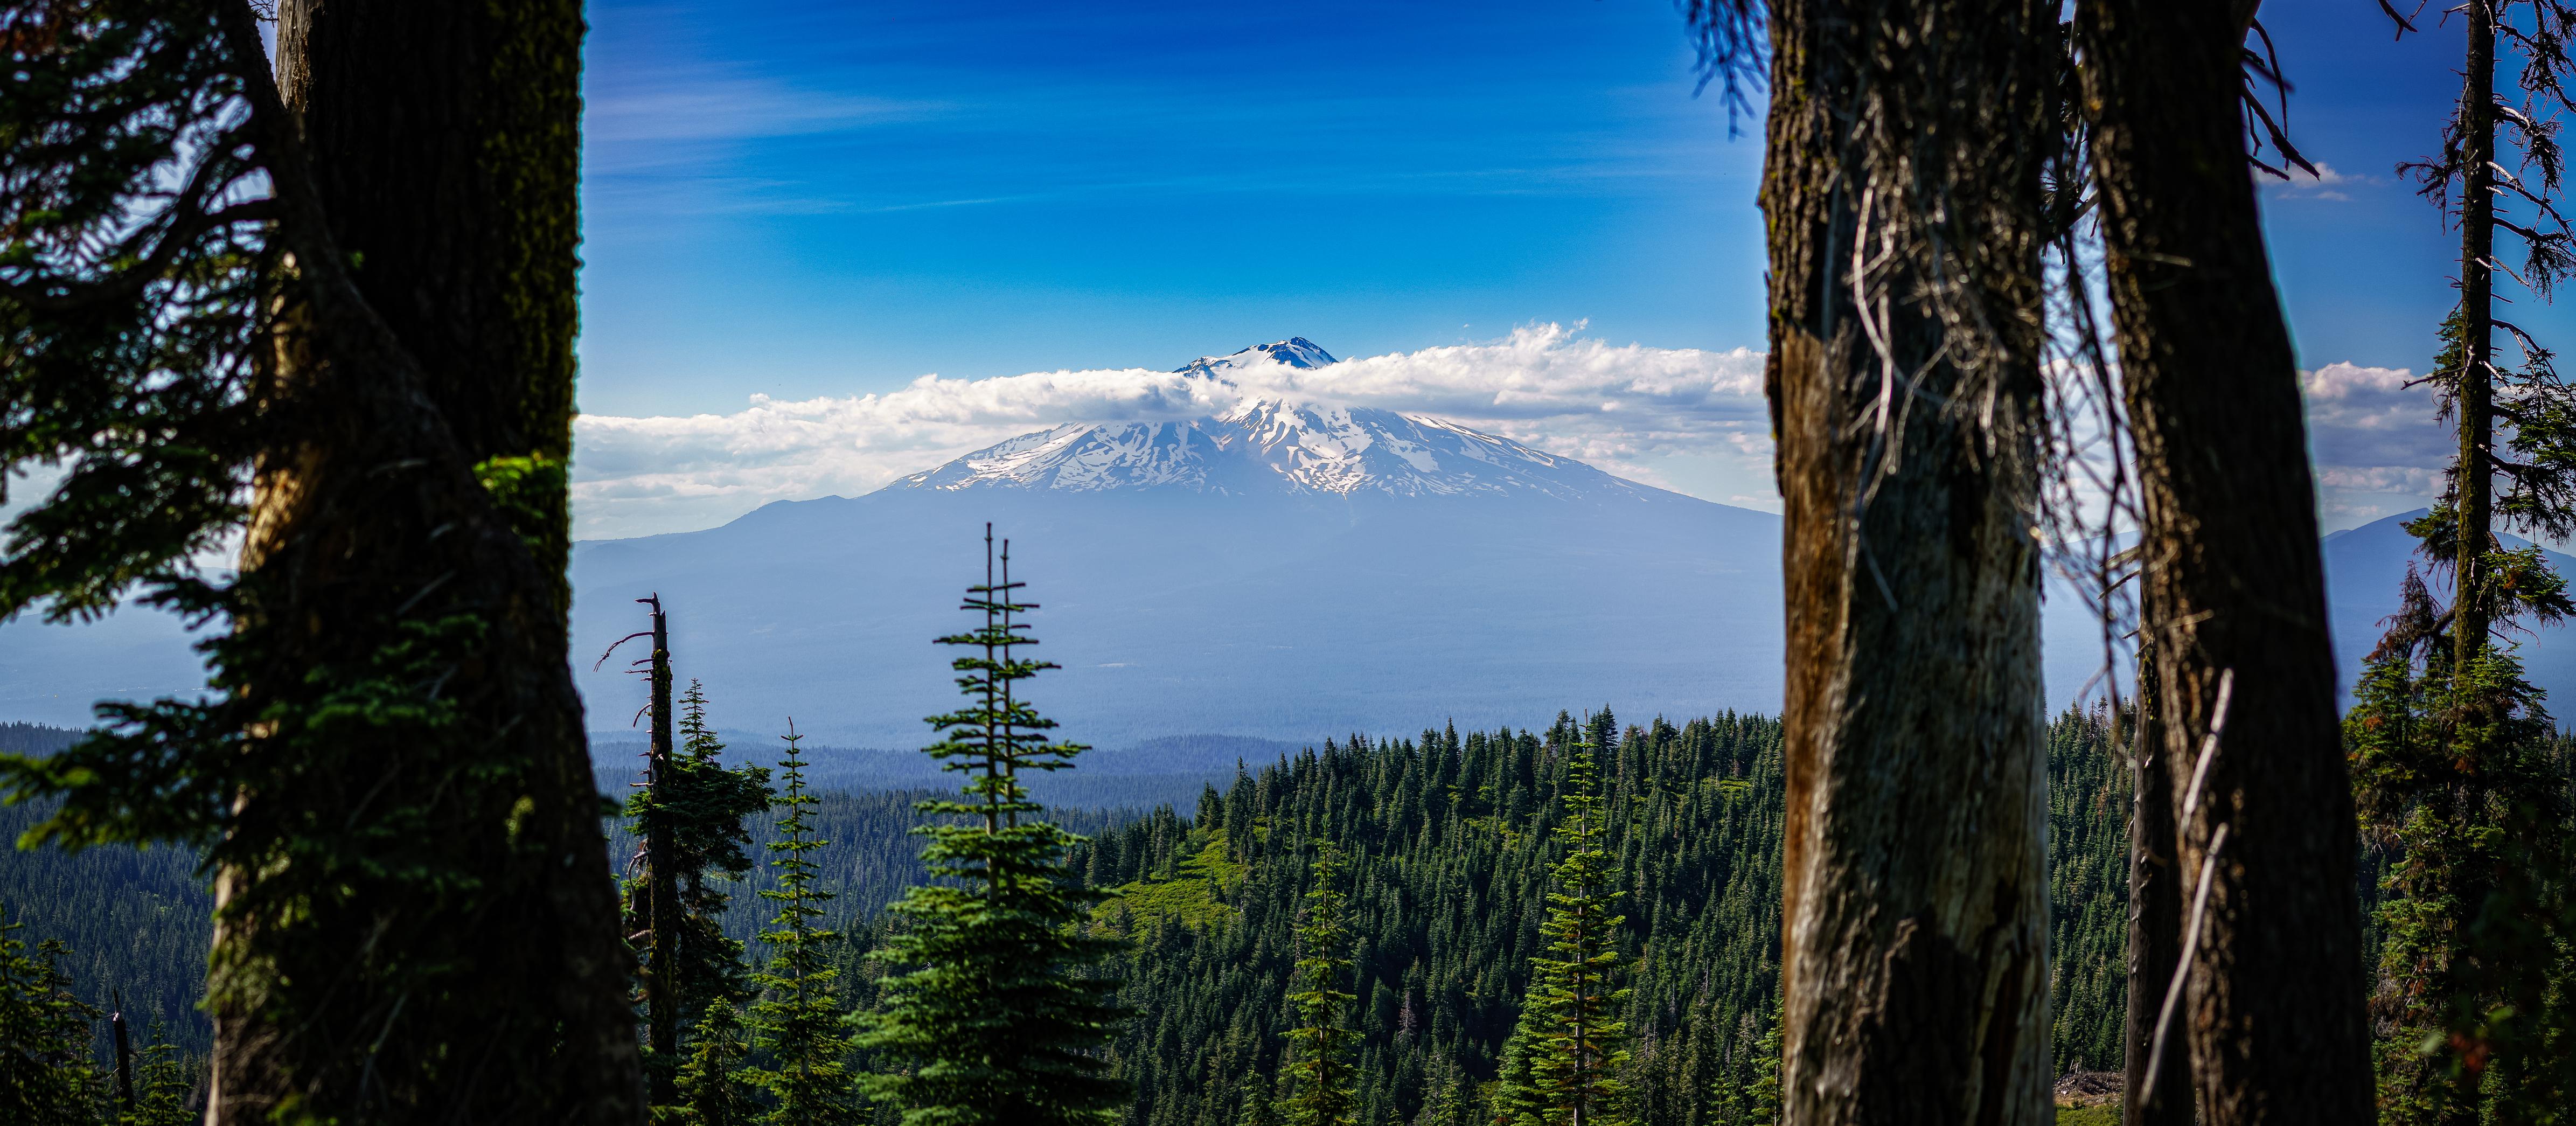 General 4782x2090 forest nature landscape California USA Mount Shasta trees clouds mountains